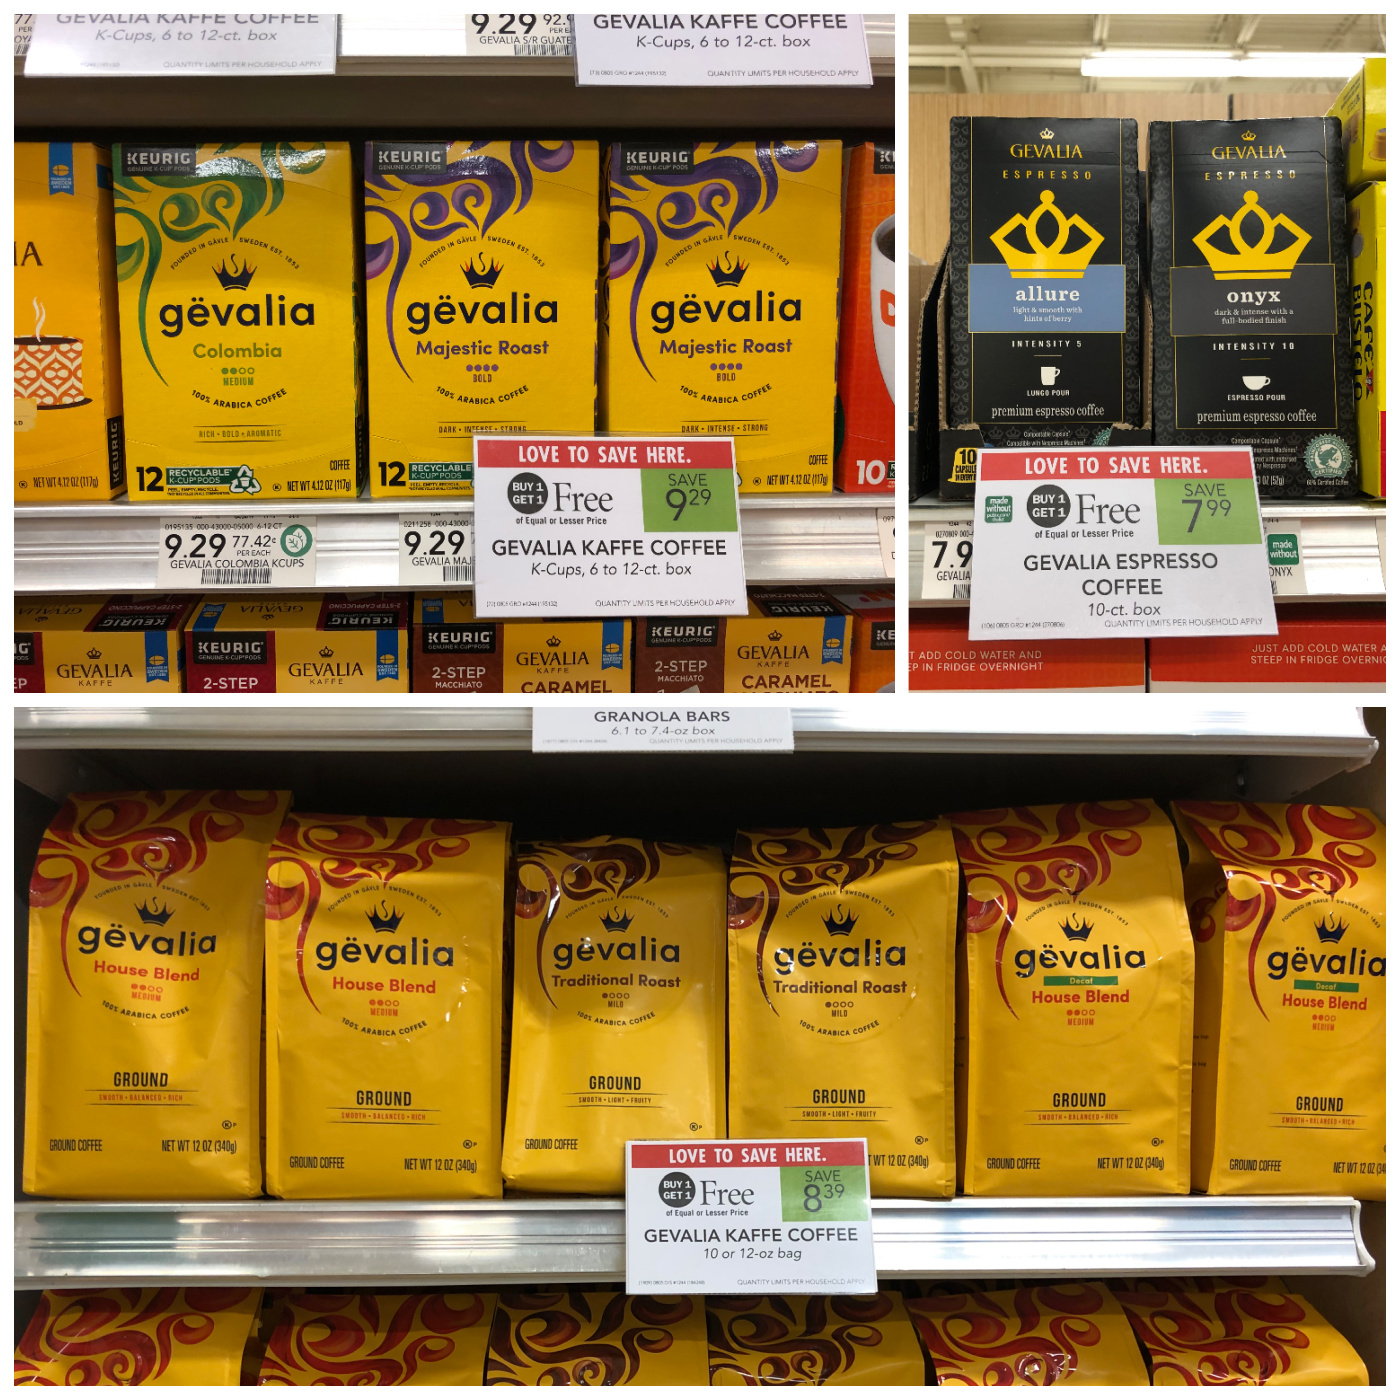 Start Your Day With The Coffee You Love - Gevalia Is BOGO At Publix! on I Heart Publix